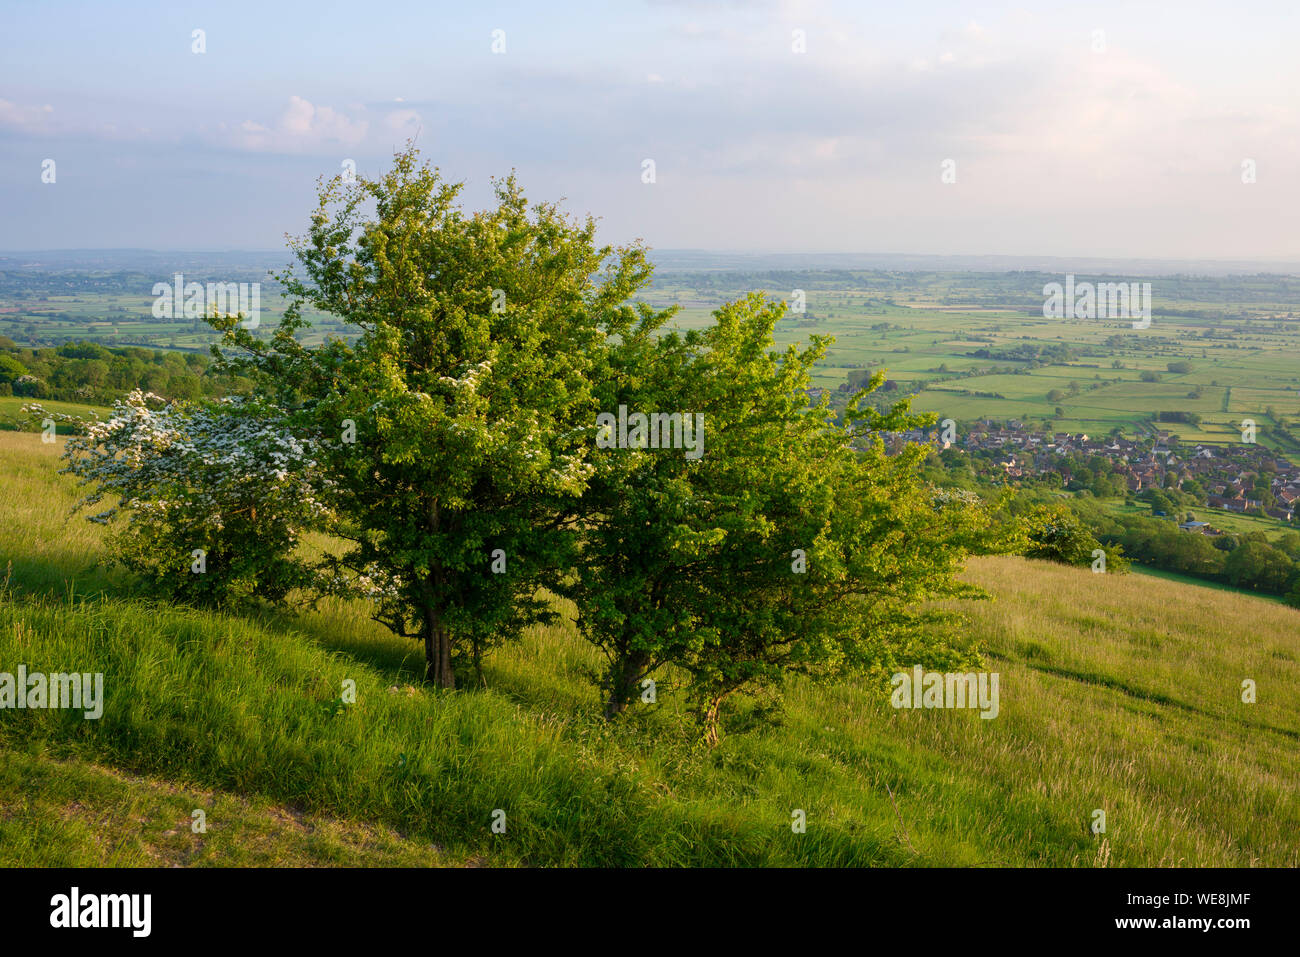 Common Hawthorn on Draycott Sleights in the Mendip Hills Area of Outstanding Natural Beauty, Somerset, England. Stock Photo